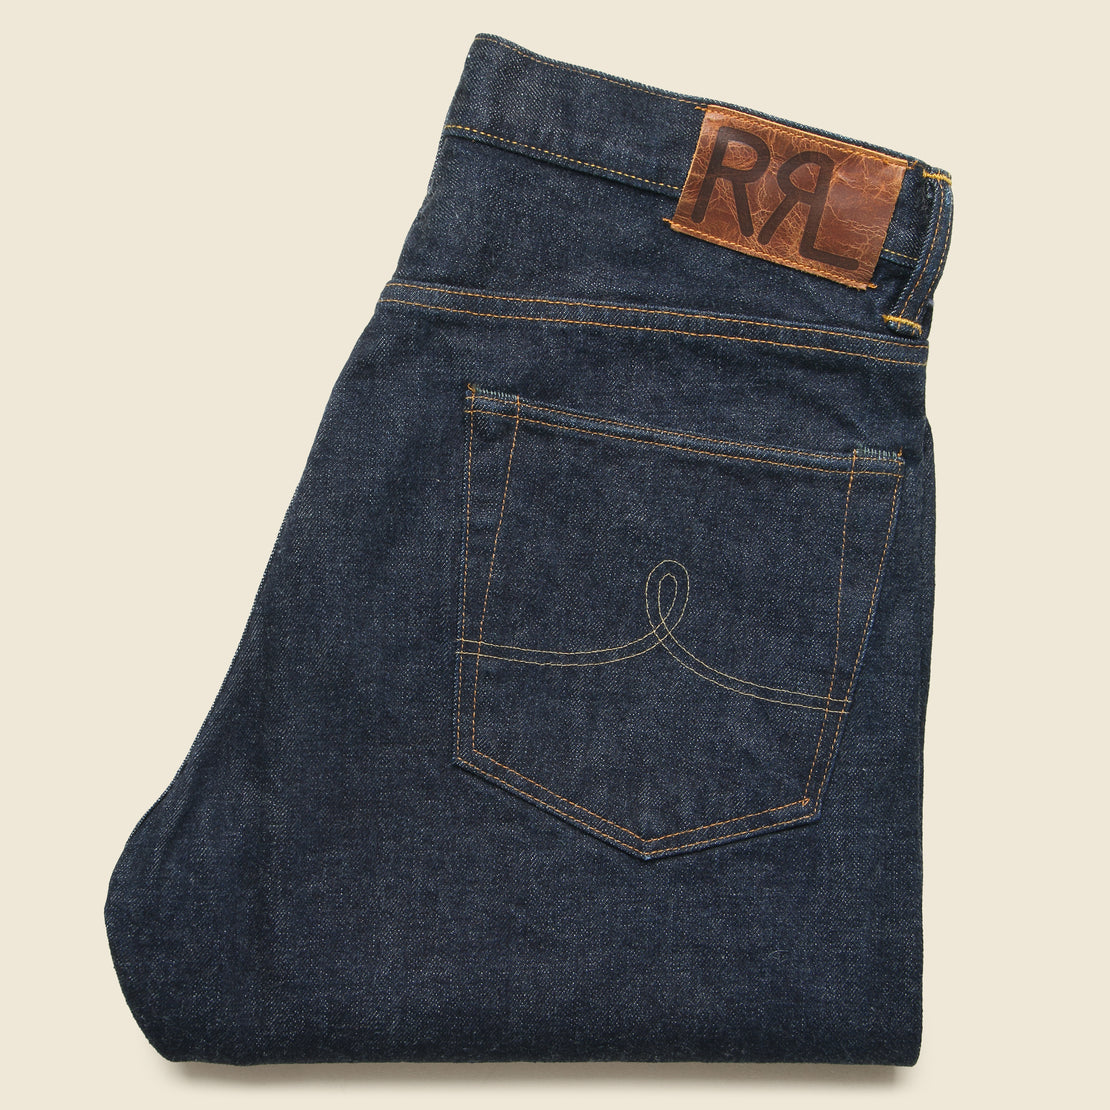 Straight Fit Selvedge Jean - East/West Rinse Wash - RRL - STAG Provisions - Pants - Denim